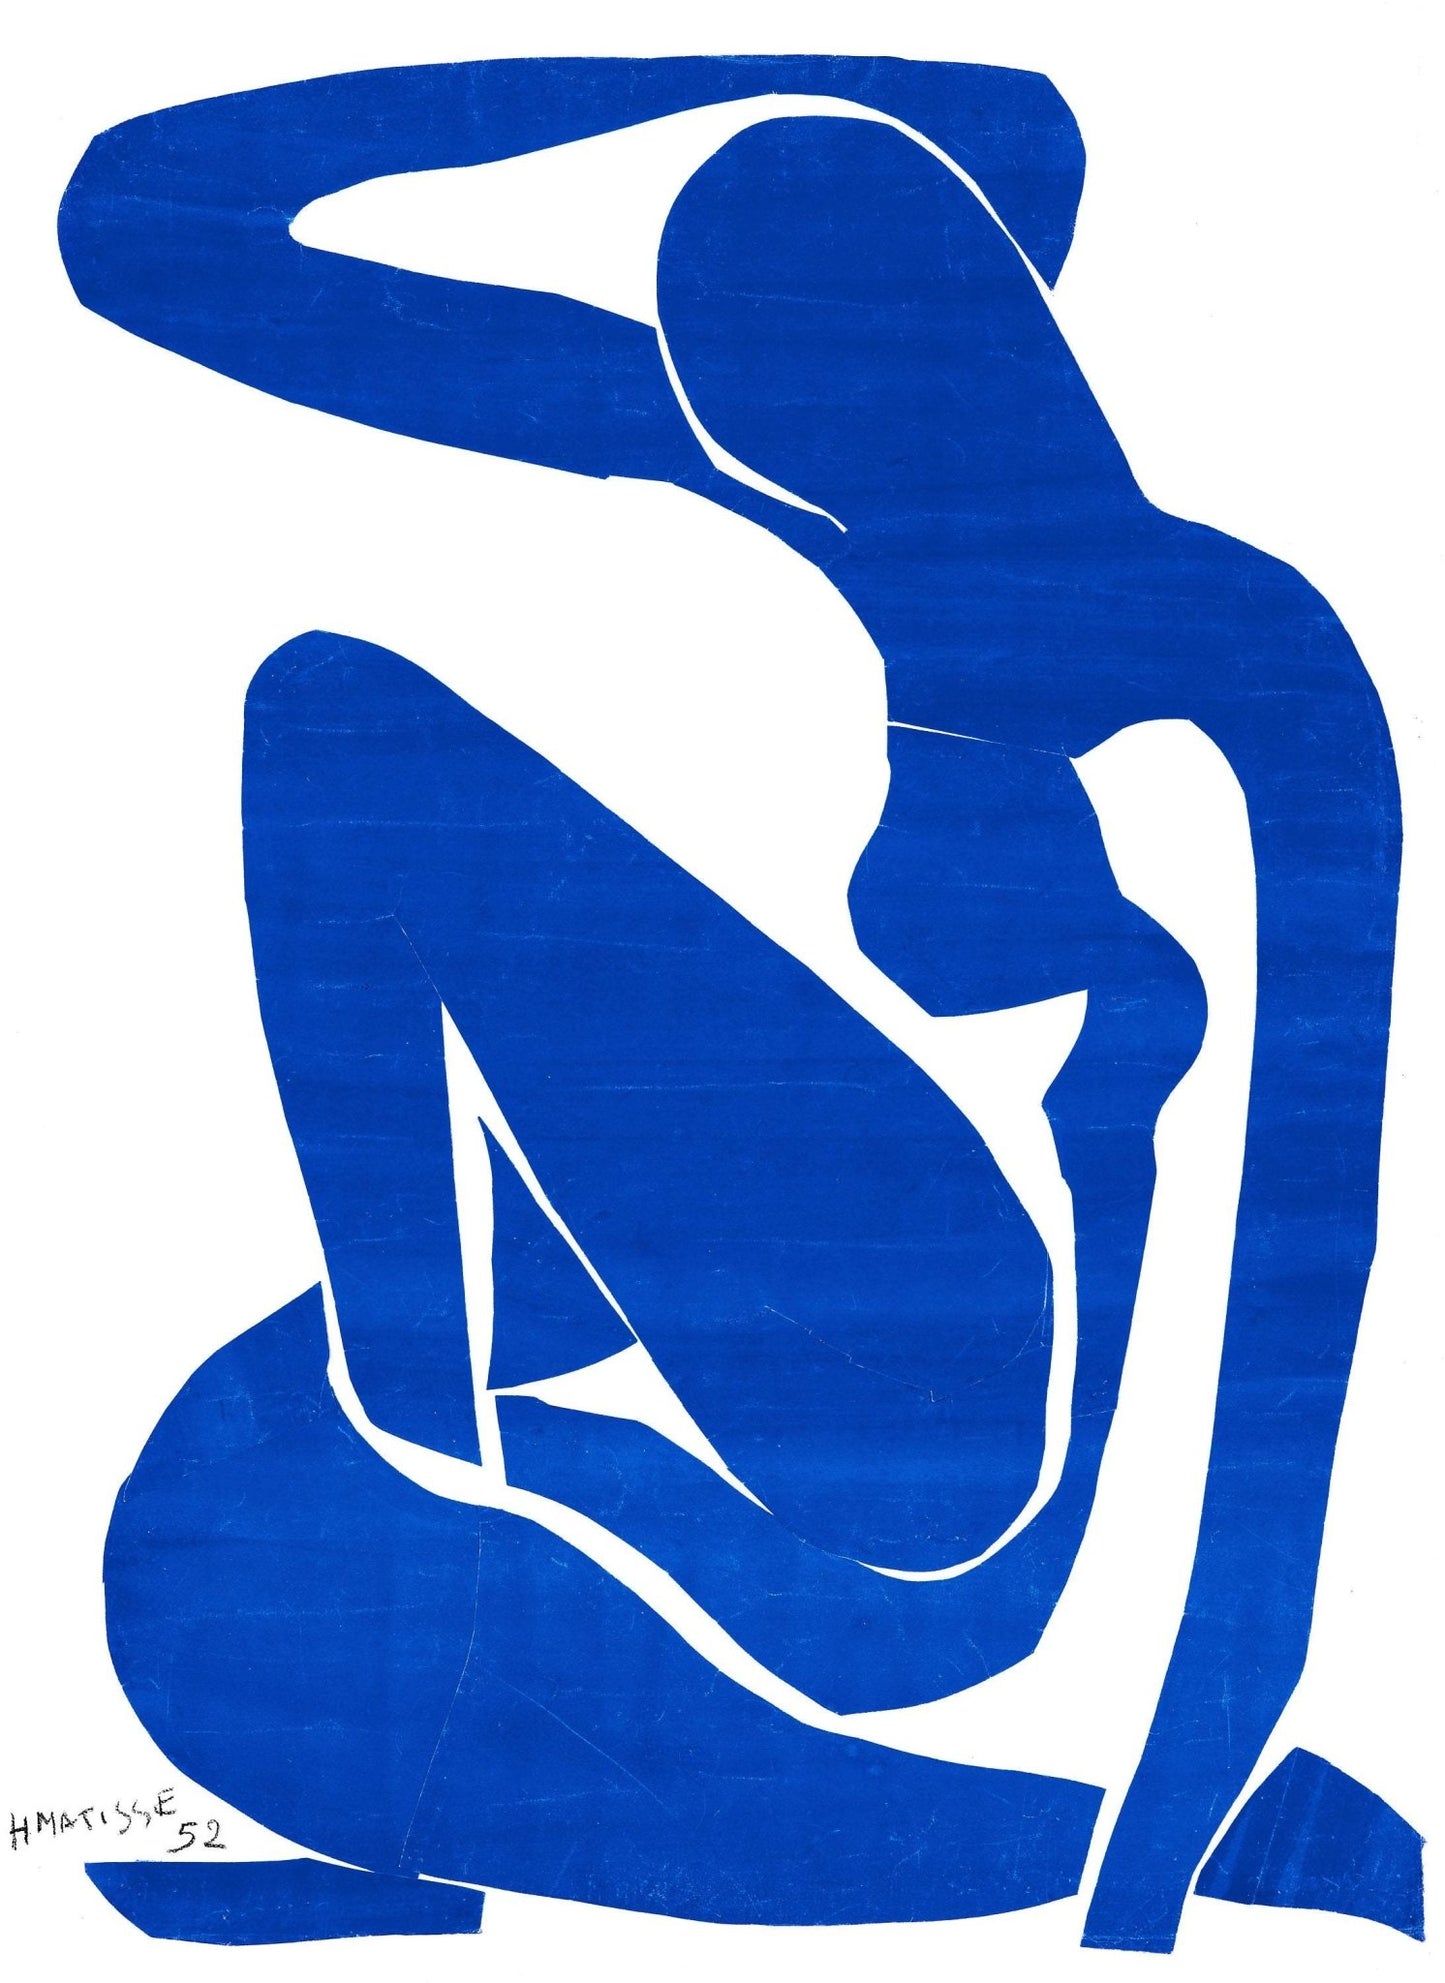 HENRI MATISSE - Woman Cut-Out from 'The Blue Nudes'